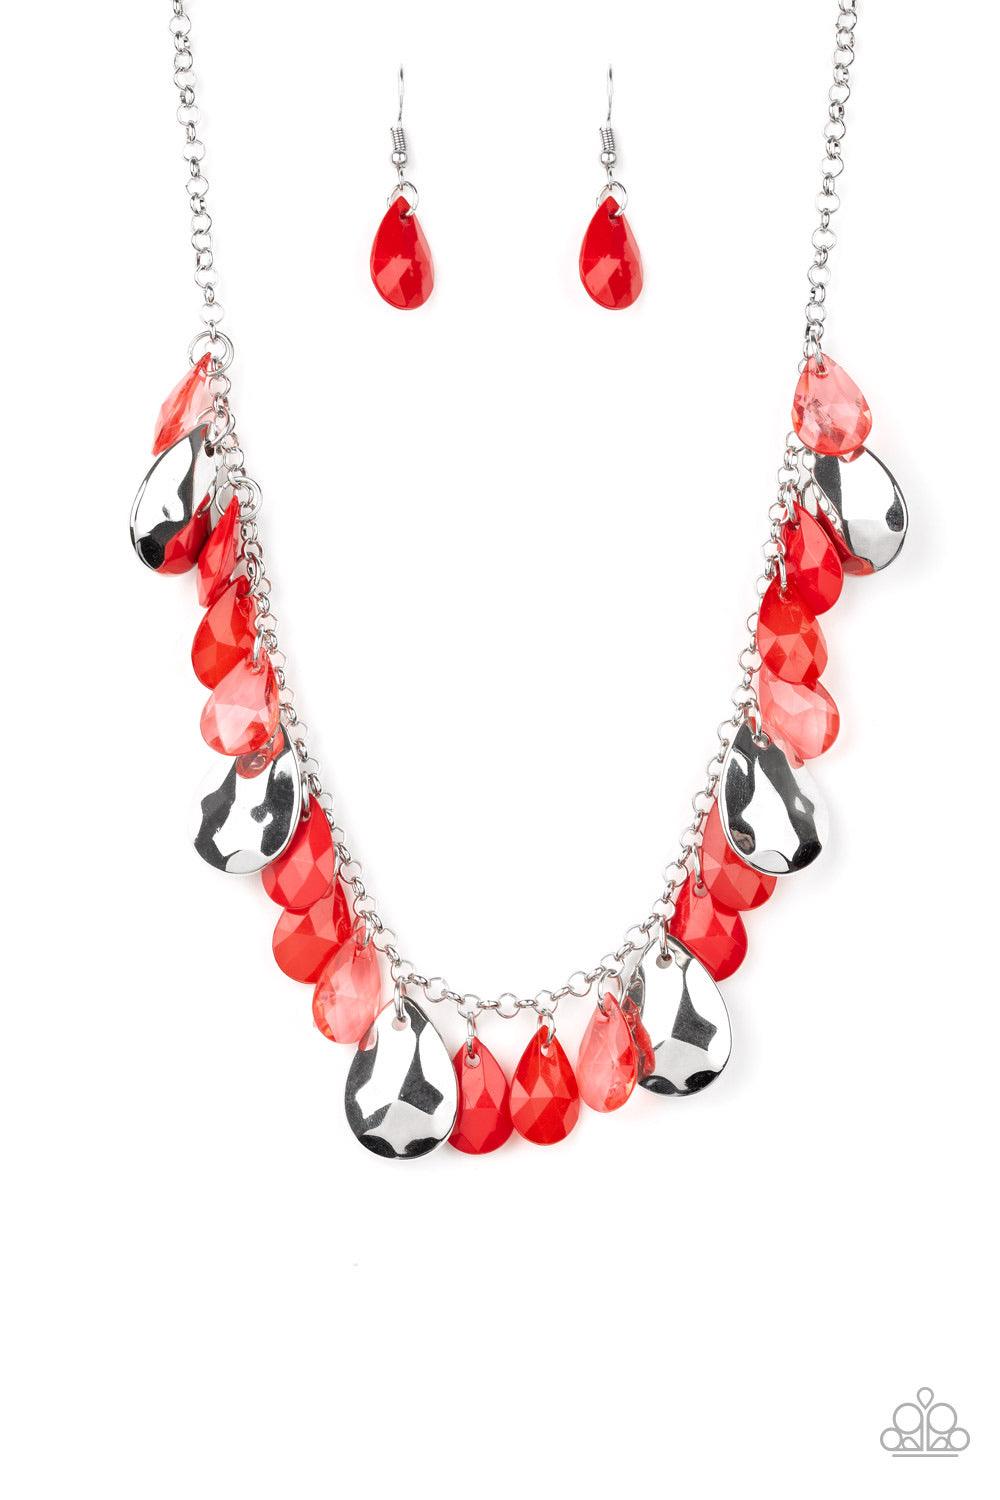 Paparazzi Accessories Hurricane Season - Red Glassy and polished red teardrops drip from the bottom of a shimmery silver chain. Faceted silver teardrops trickle between the colorful beading, adding a flashy finish to the flirtatious fringe. Features an ad